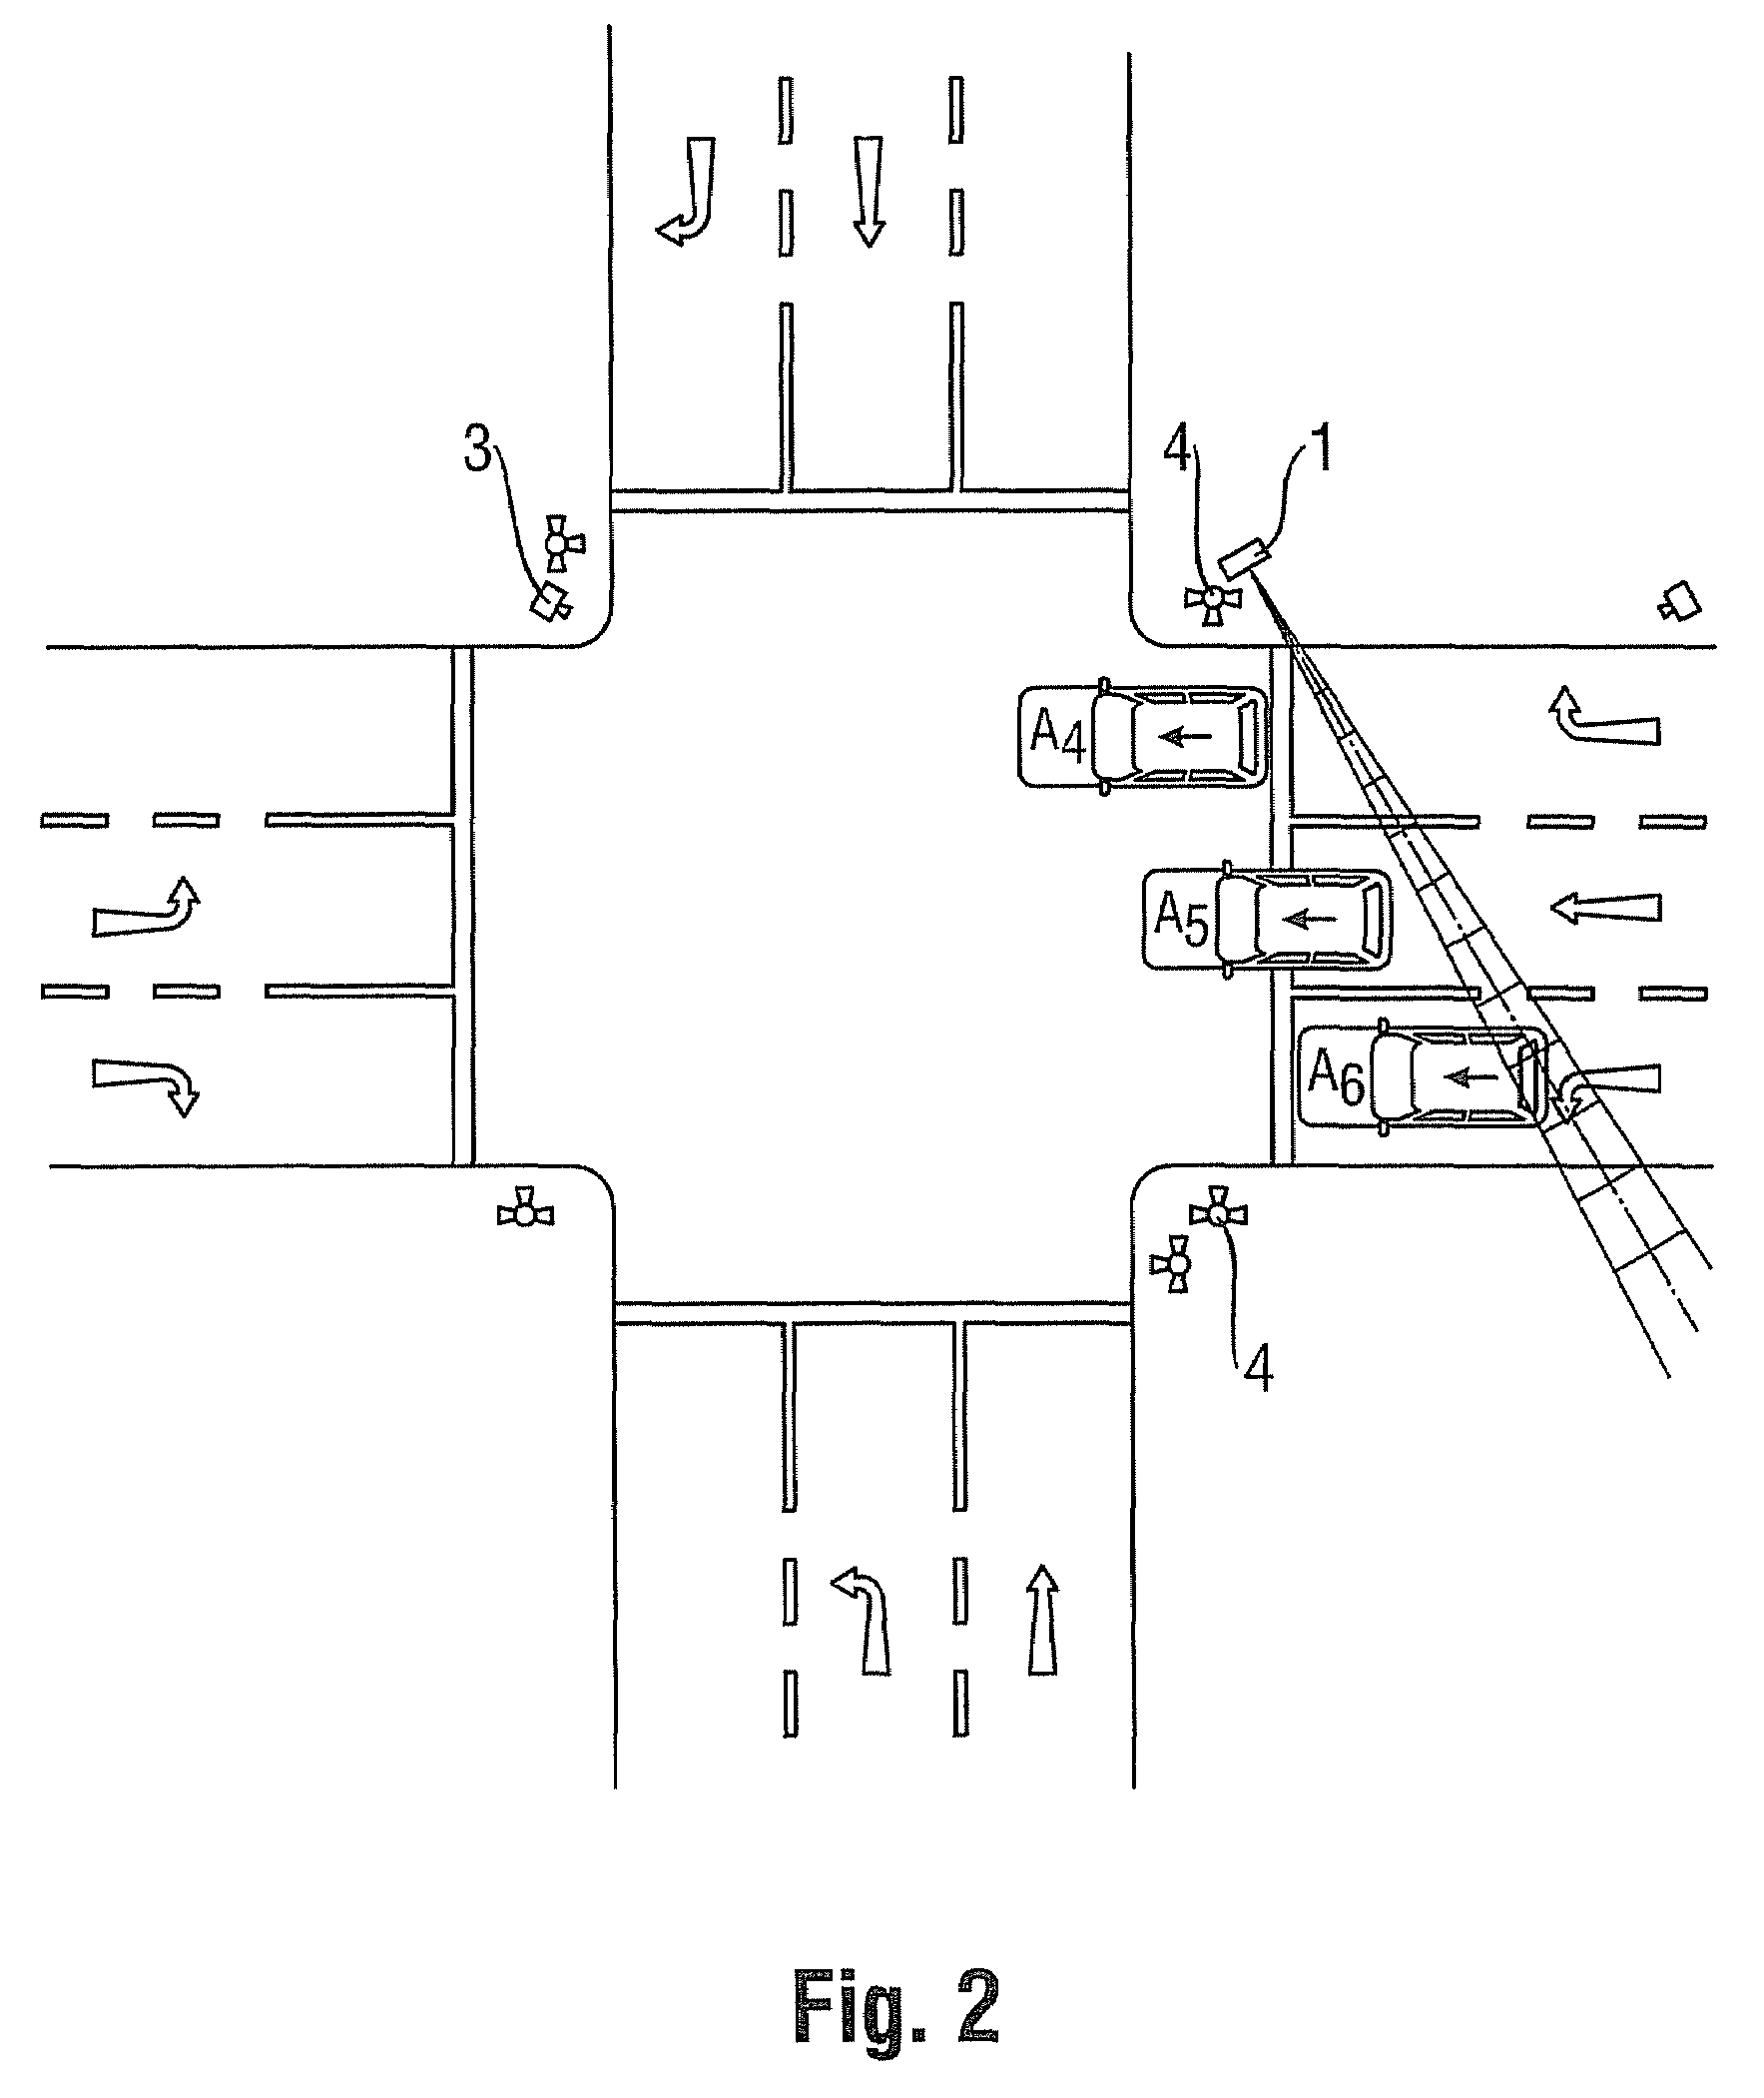 Method for detecting and documenting traffic violations at a traffic light